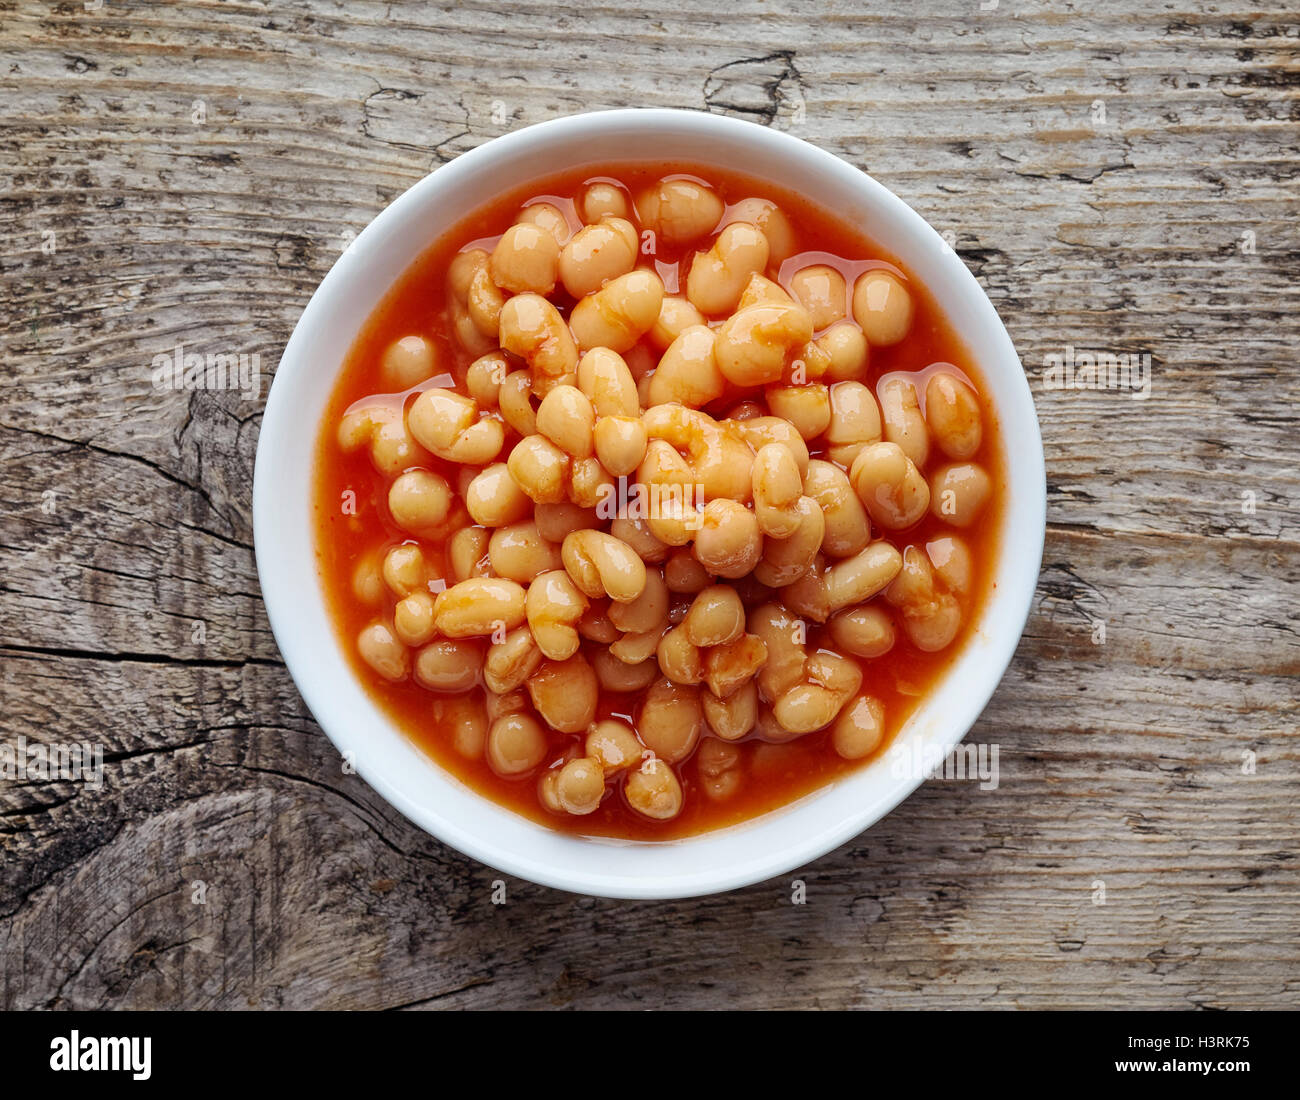 White bowl of beans in tomato sauce on wooden table, top view Stock Photo